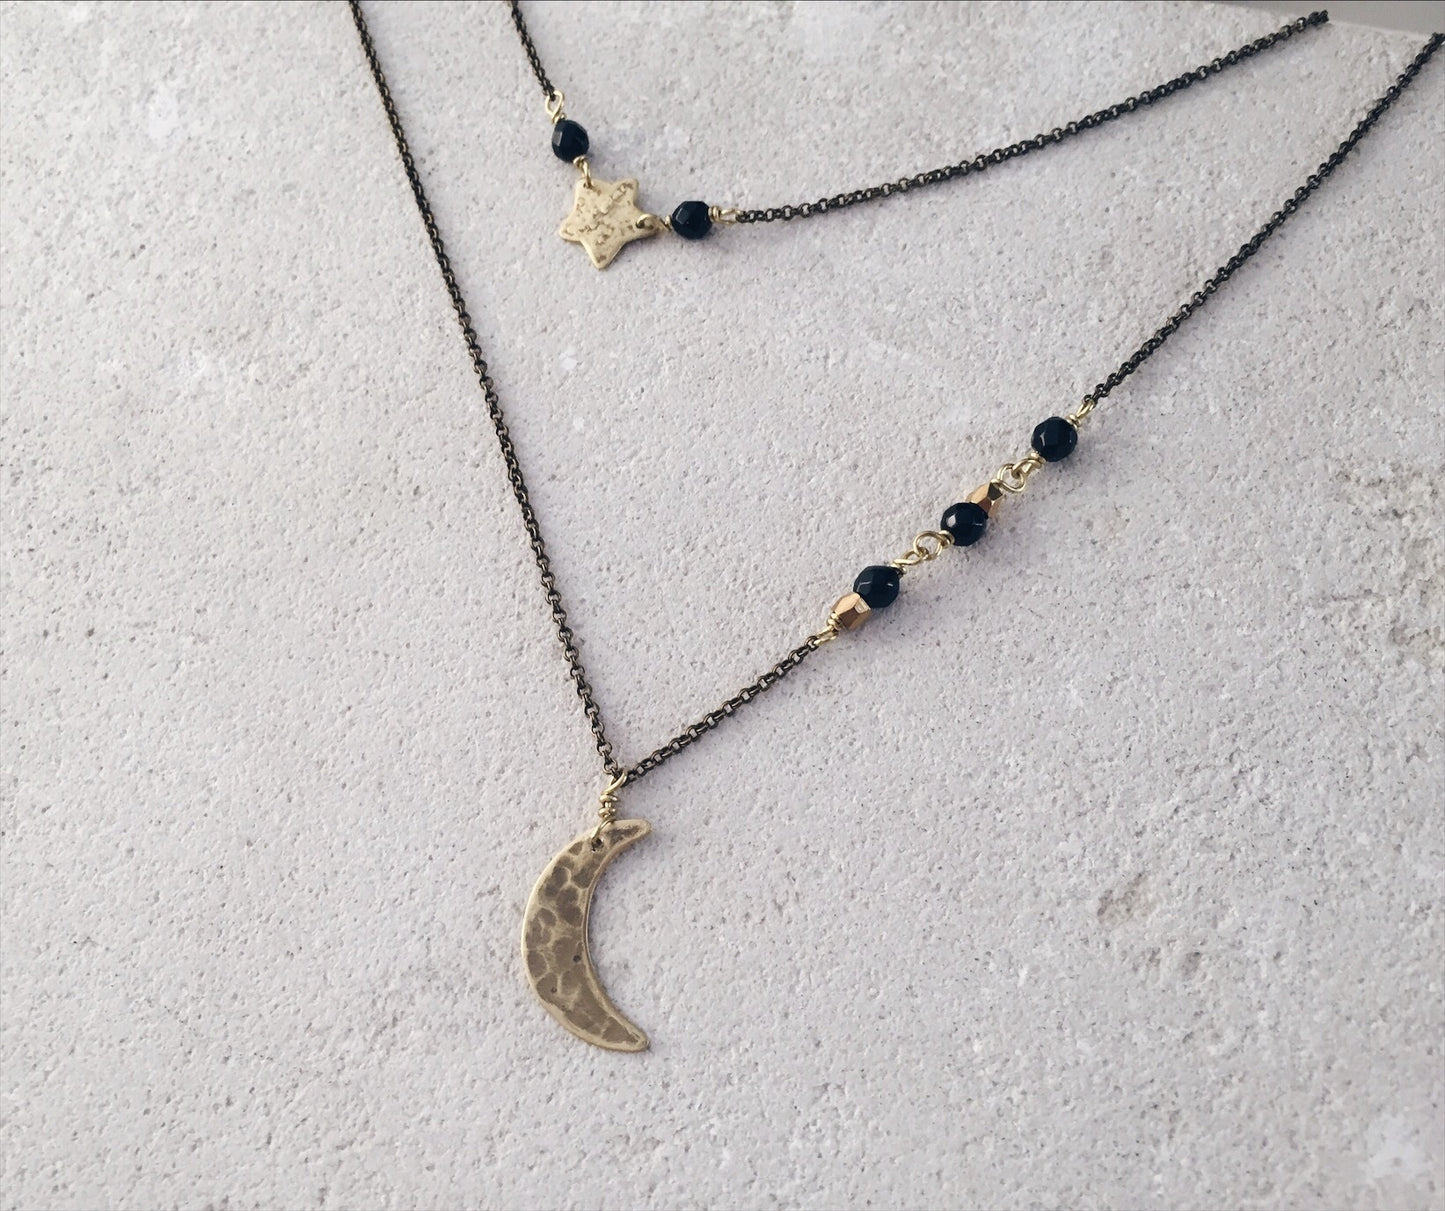 Shooting Star Double Chain Necklace with Black Onyx